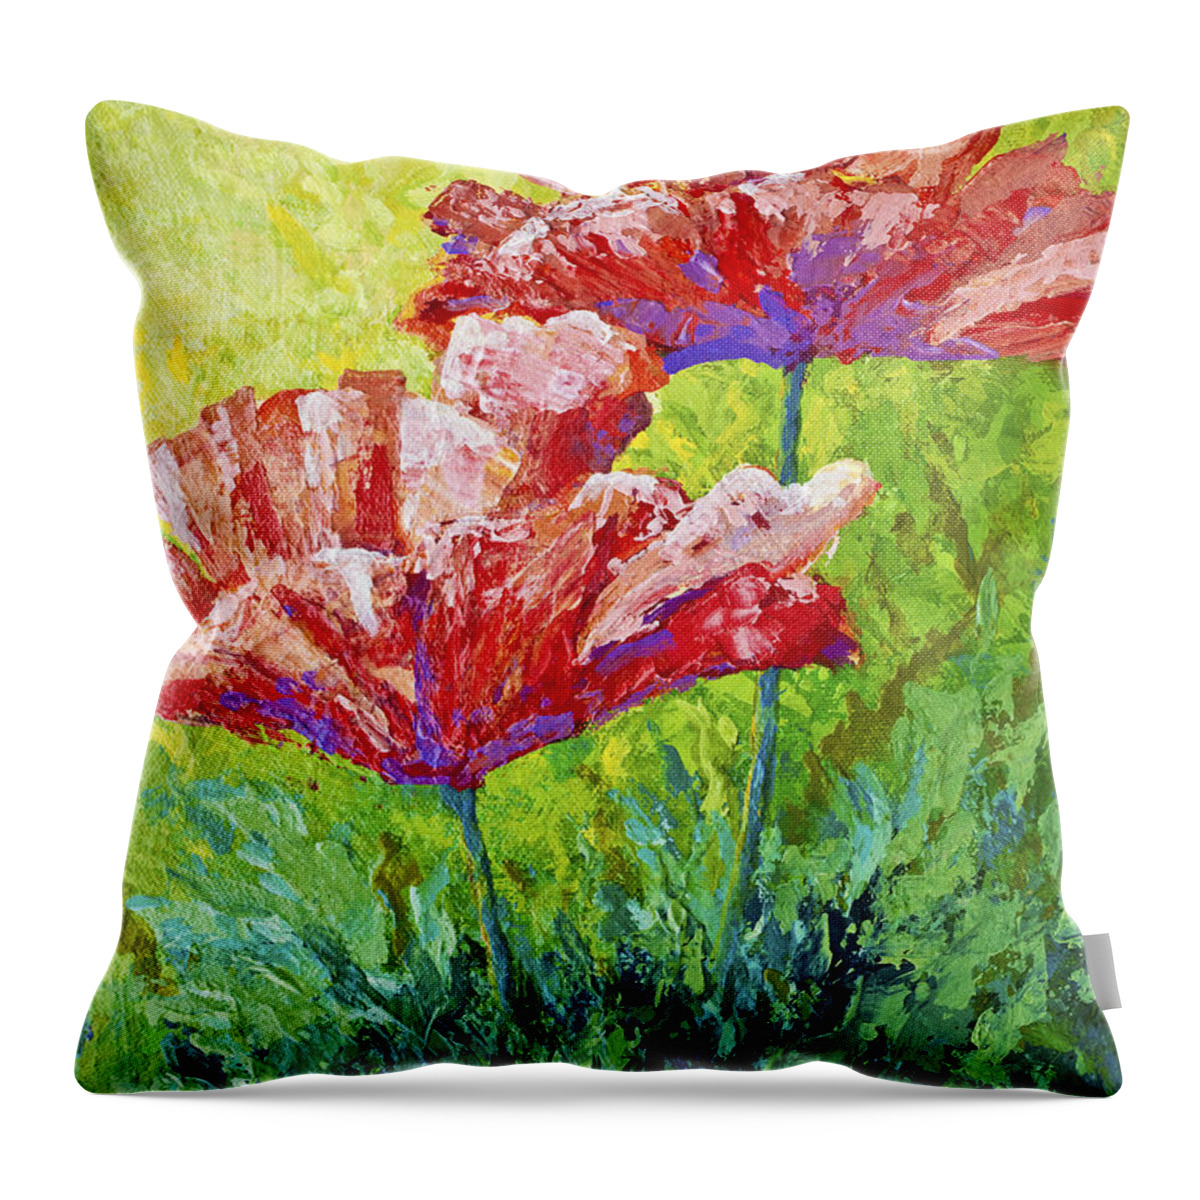 New From My Floral And Nature Collection! Throw Pillow featuring the painting Two Red Poppies by Marion Rose